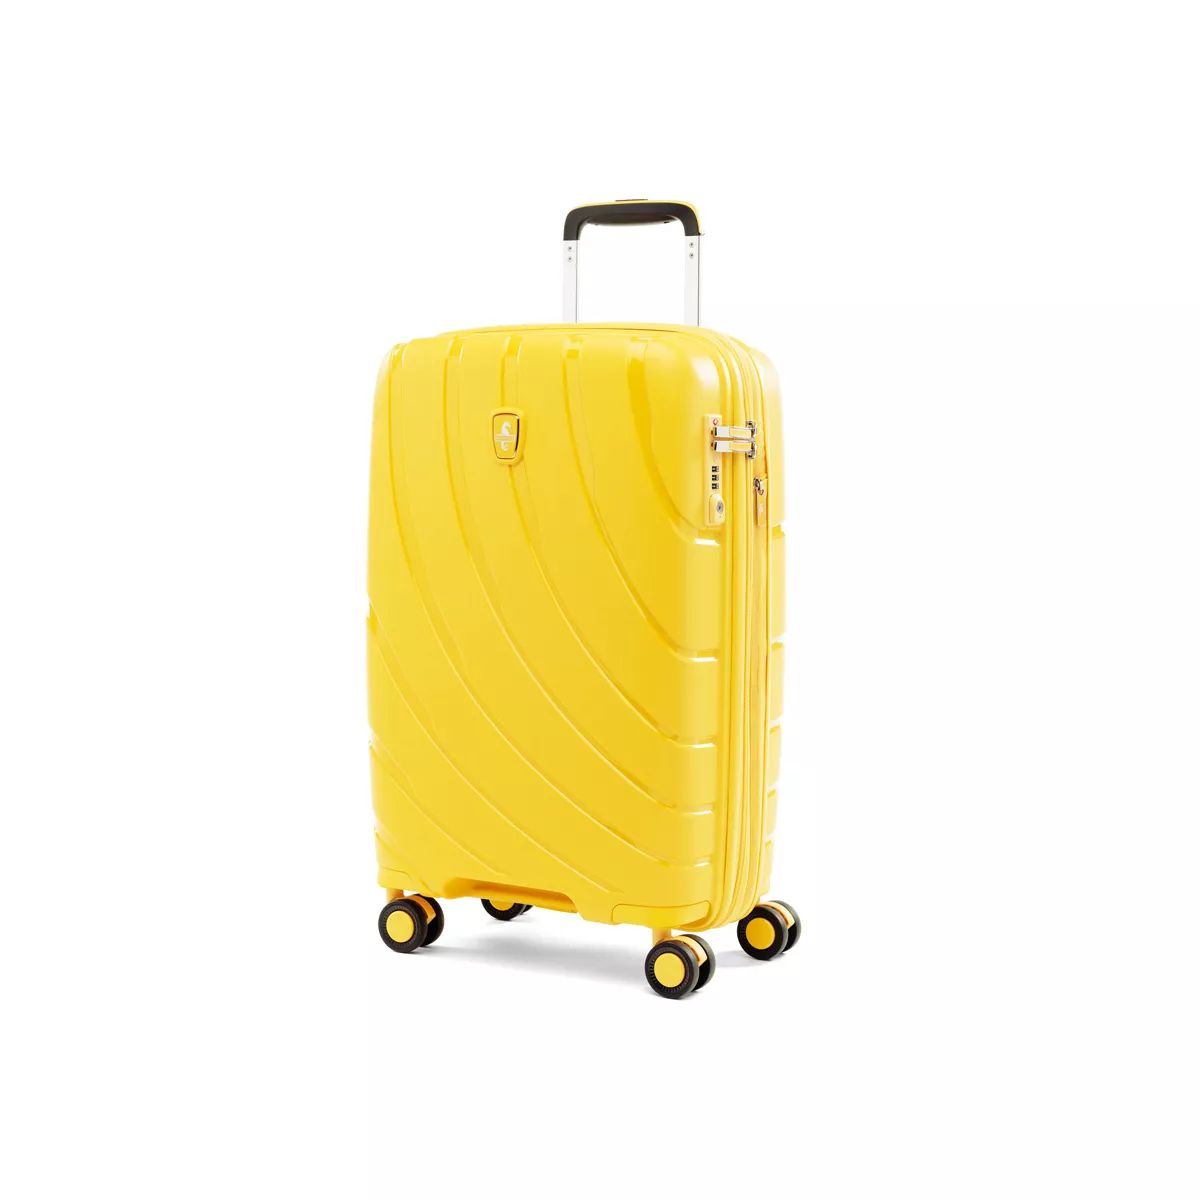 Atlantic® Luggage Carry-on Expandable Hardside Spinner | Target